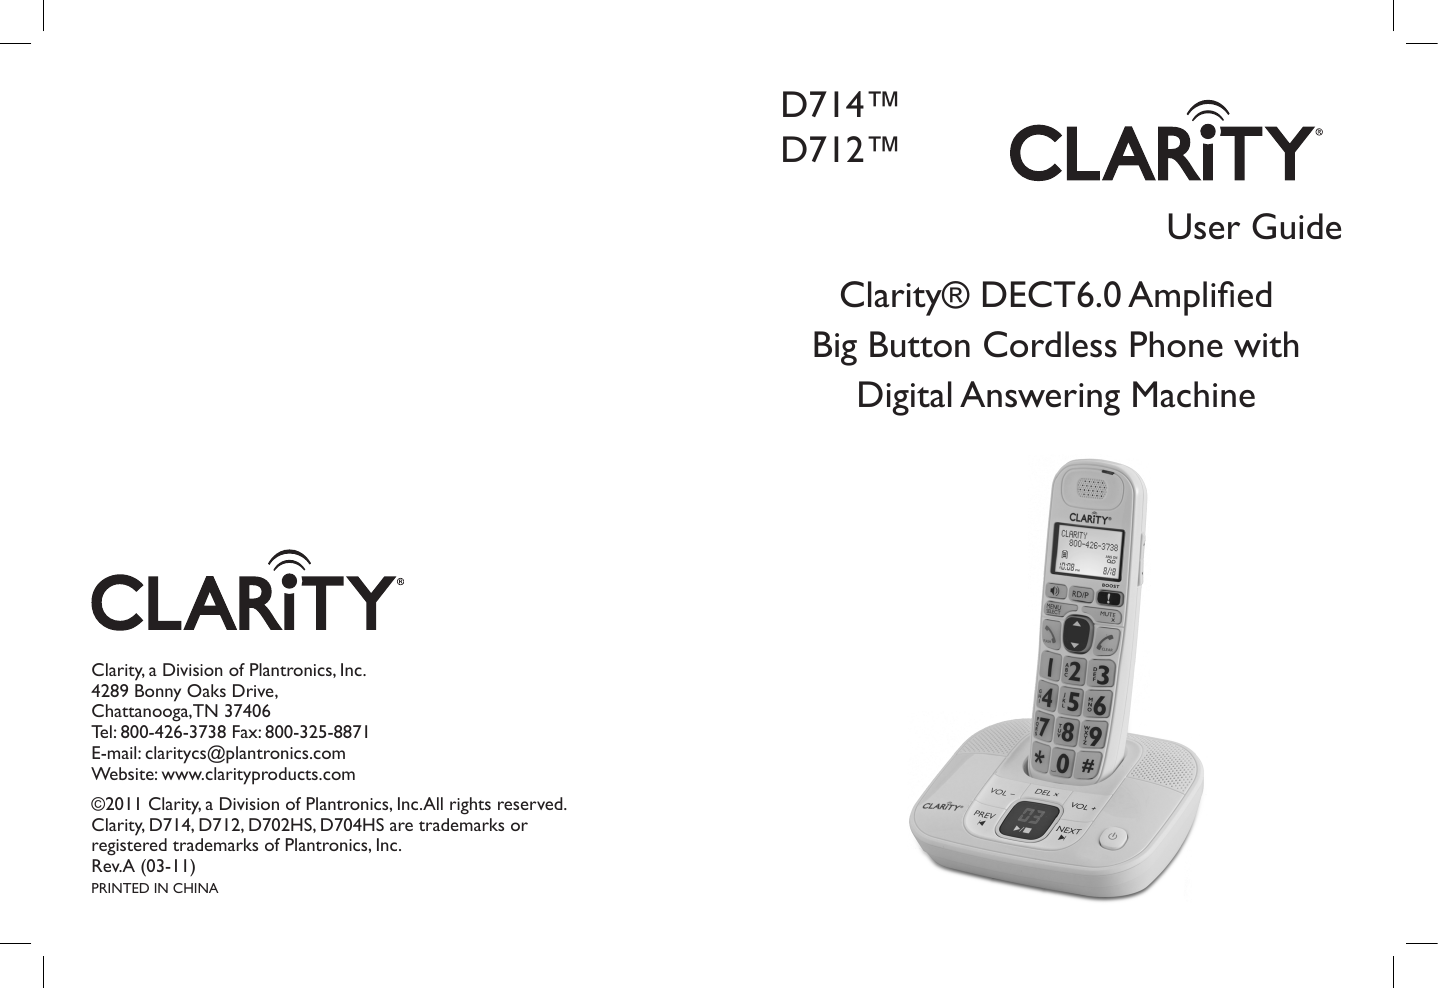 User GuideClarity® DECT6.0 Amplied Big Button Cordless Phone with Digital Answering MachineD714™D712™Clarity, a Division of Plantronics, Inc.4289 Bonny Oaks Drive,Chattanooga,TN 37406Tel: 800-426-3738 Fax: 800-325-8871E-mail: claritycs@plantronics.com Website: www.clarityproducts.com©2011 Clarity, a Division of Plantronics, Inc.All rights reserved. Clarity, D714, D712, D702HS, D704HS are trademarks or registered trademarks of Plantronics, Inc.Rev.A (03-11)PRINTED IN CHINA